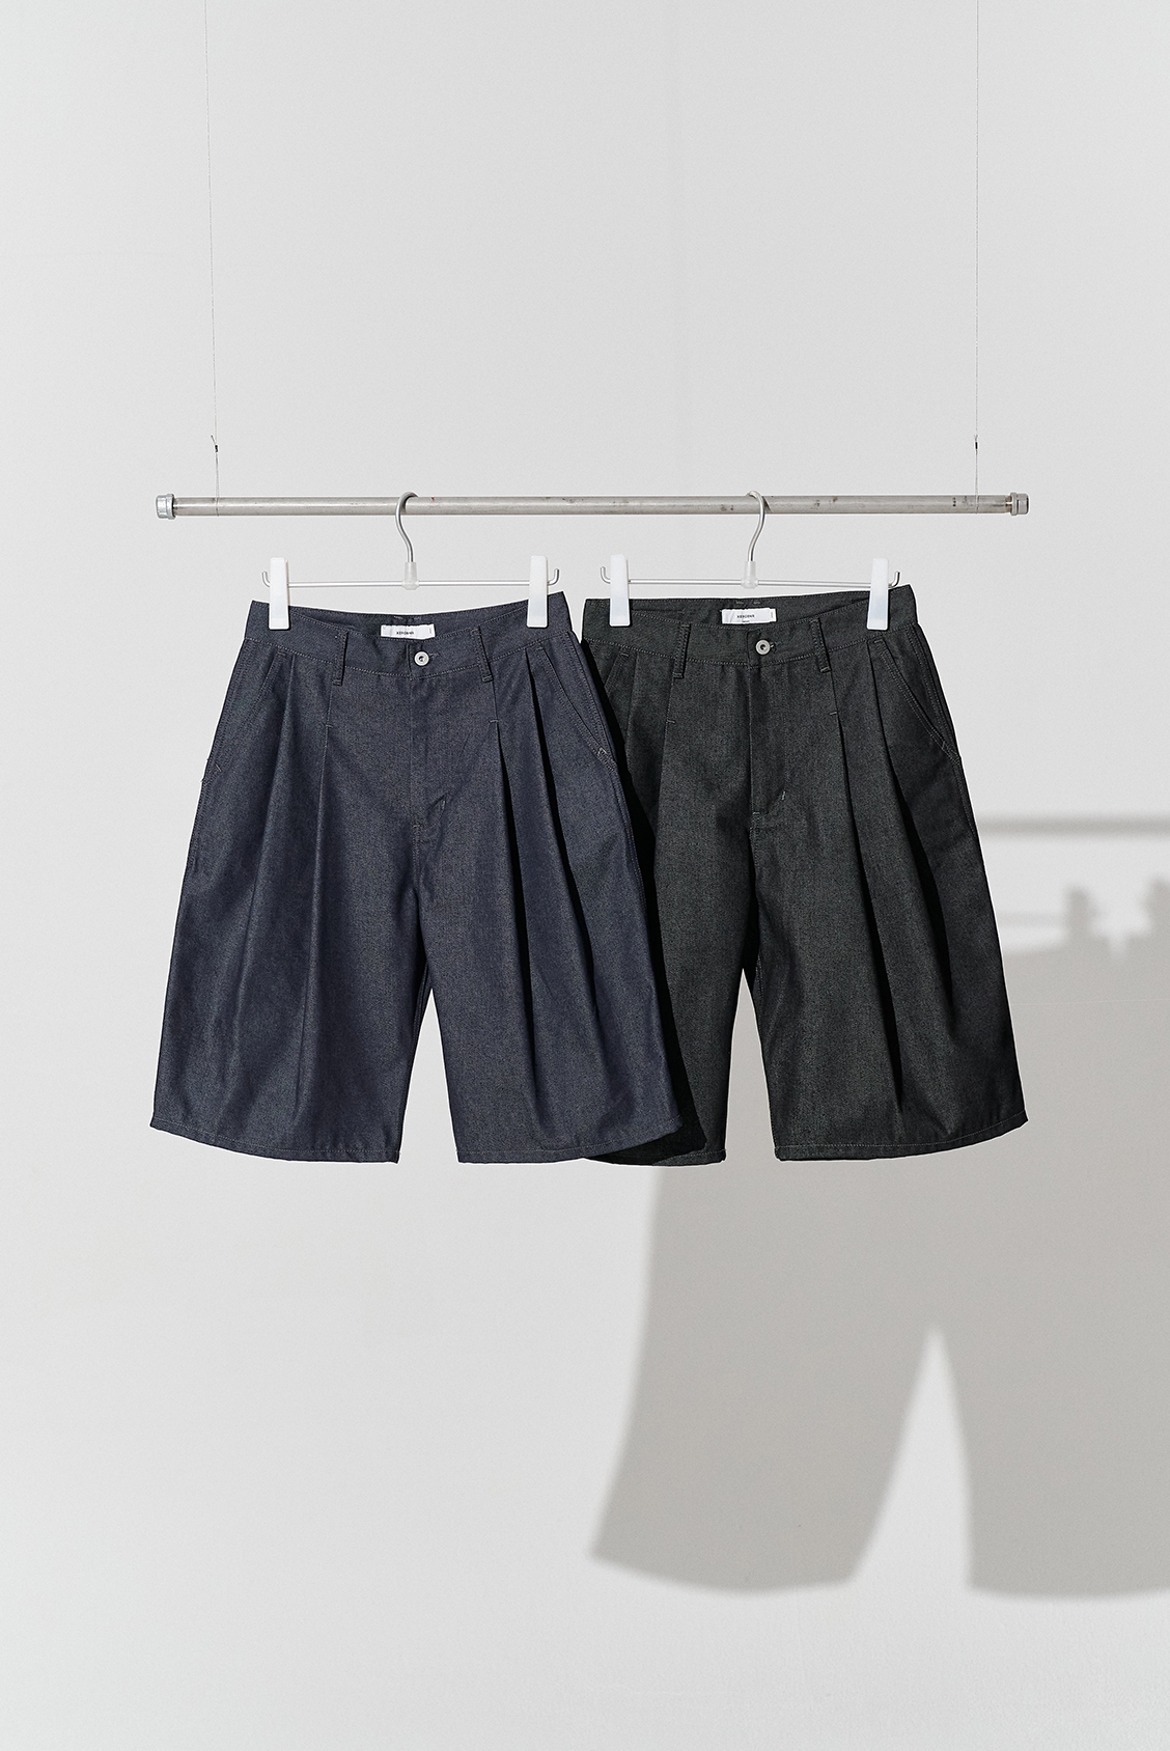 Two Tuck Clean Denim Shorts [2 Colors]